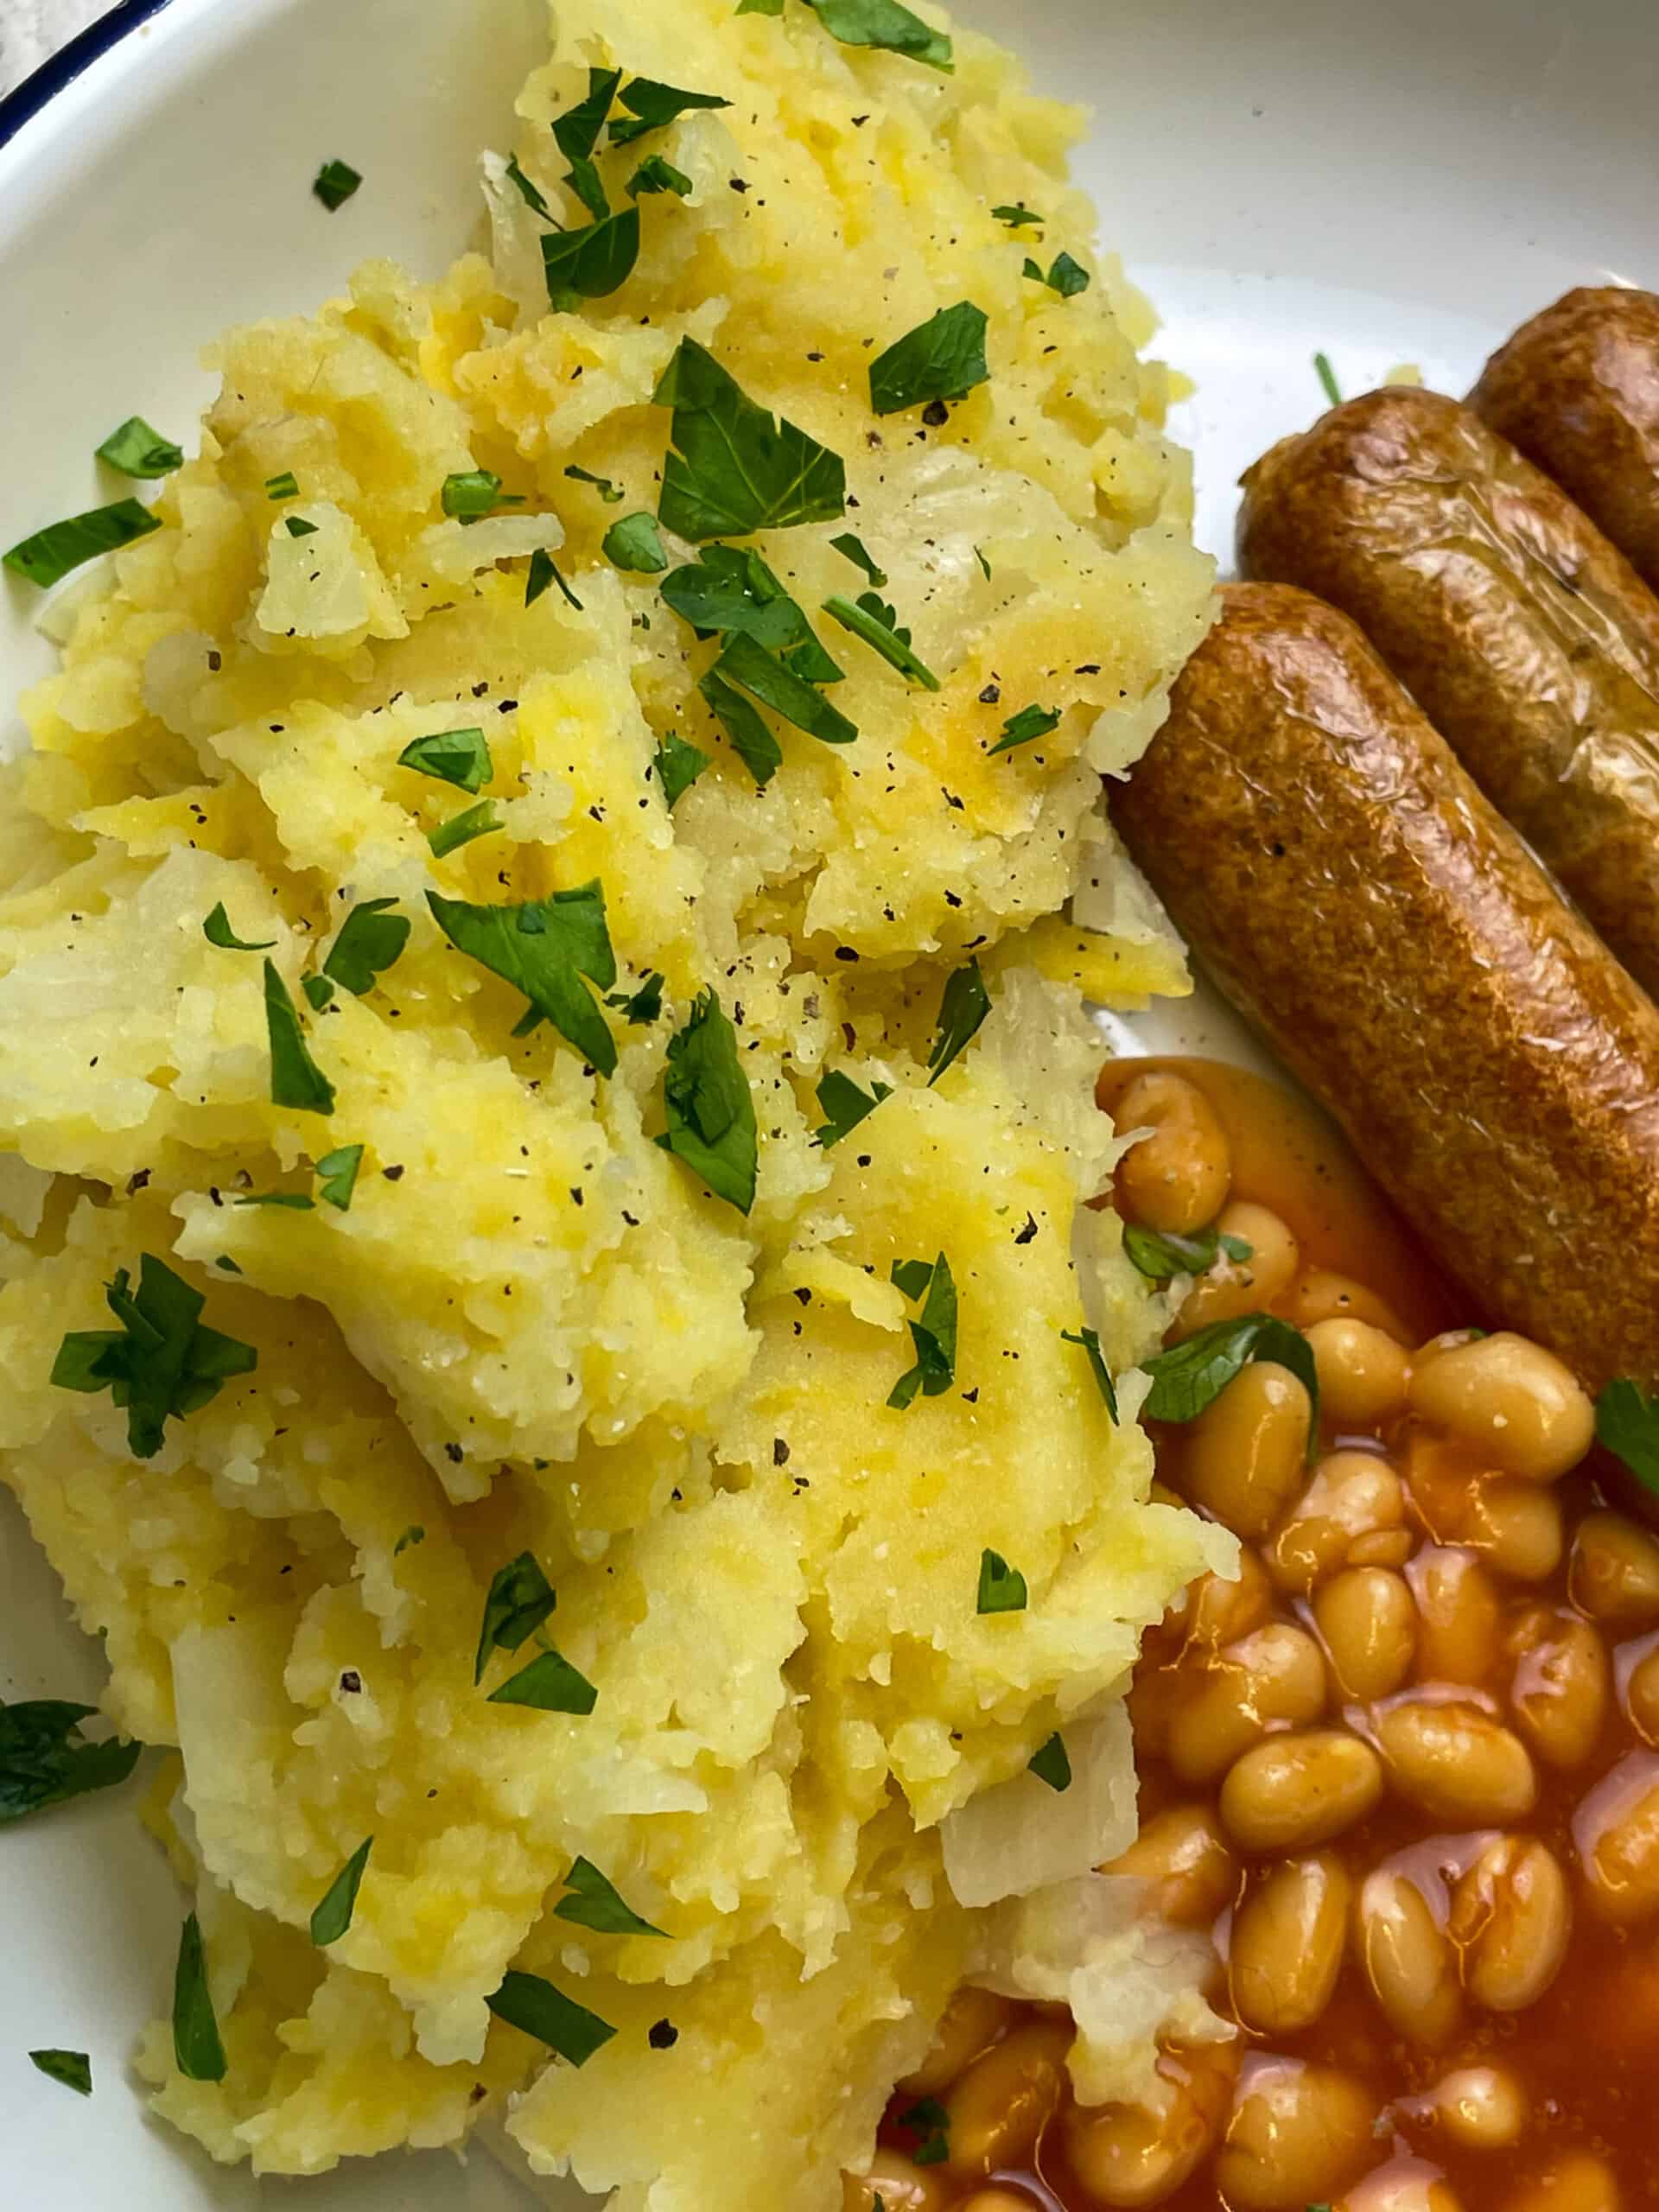 wartime champ with chopped parsley, baked beans and sausages at the side of the white plate.